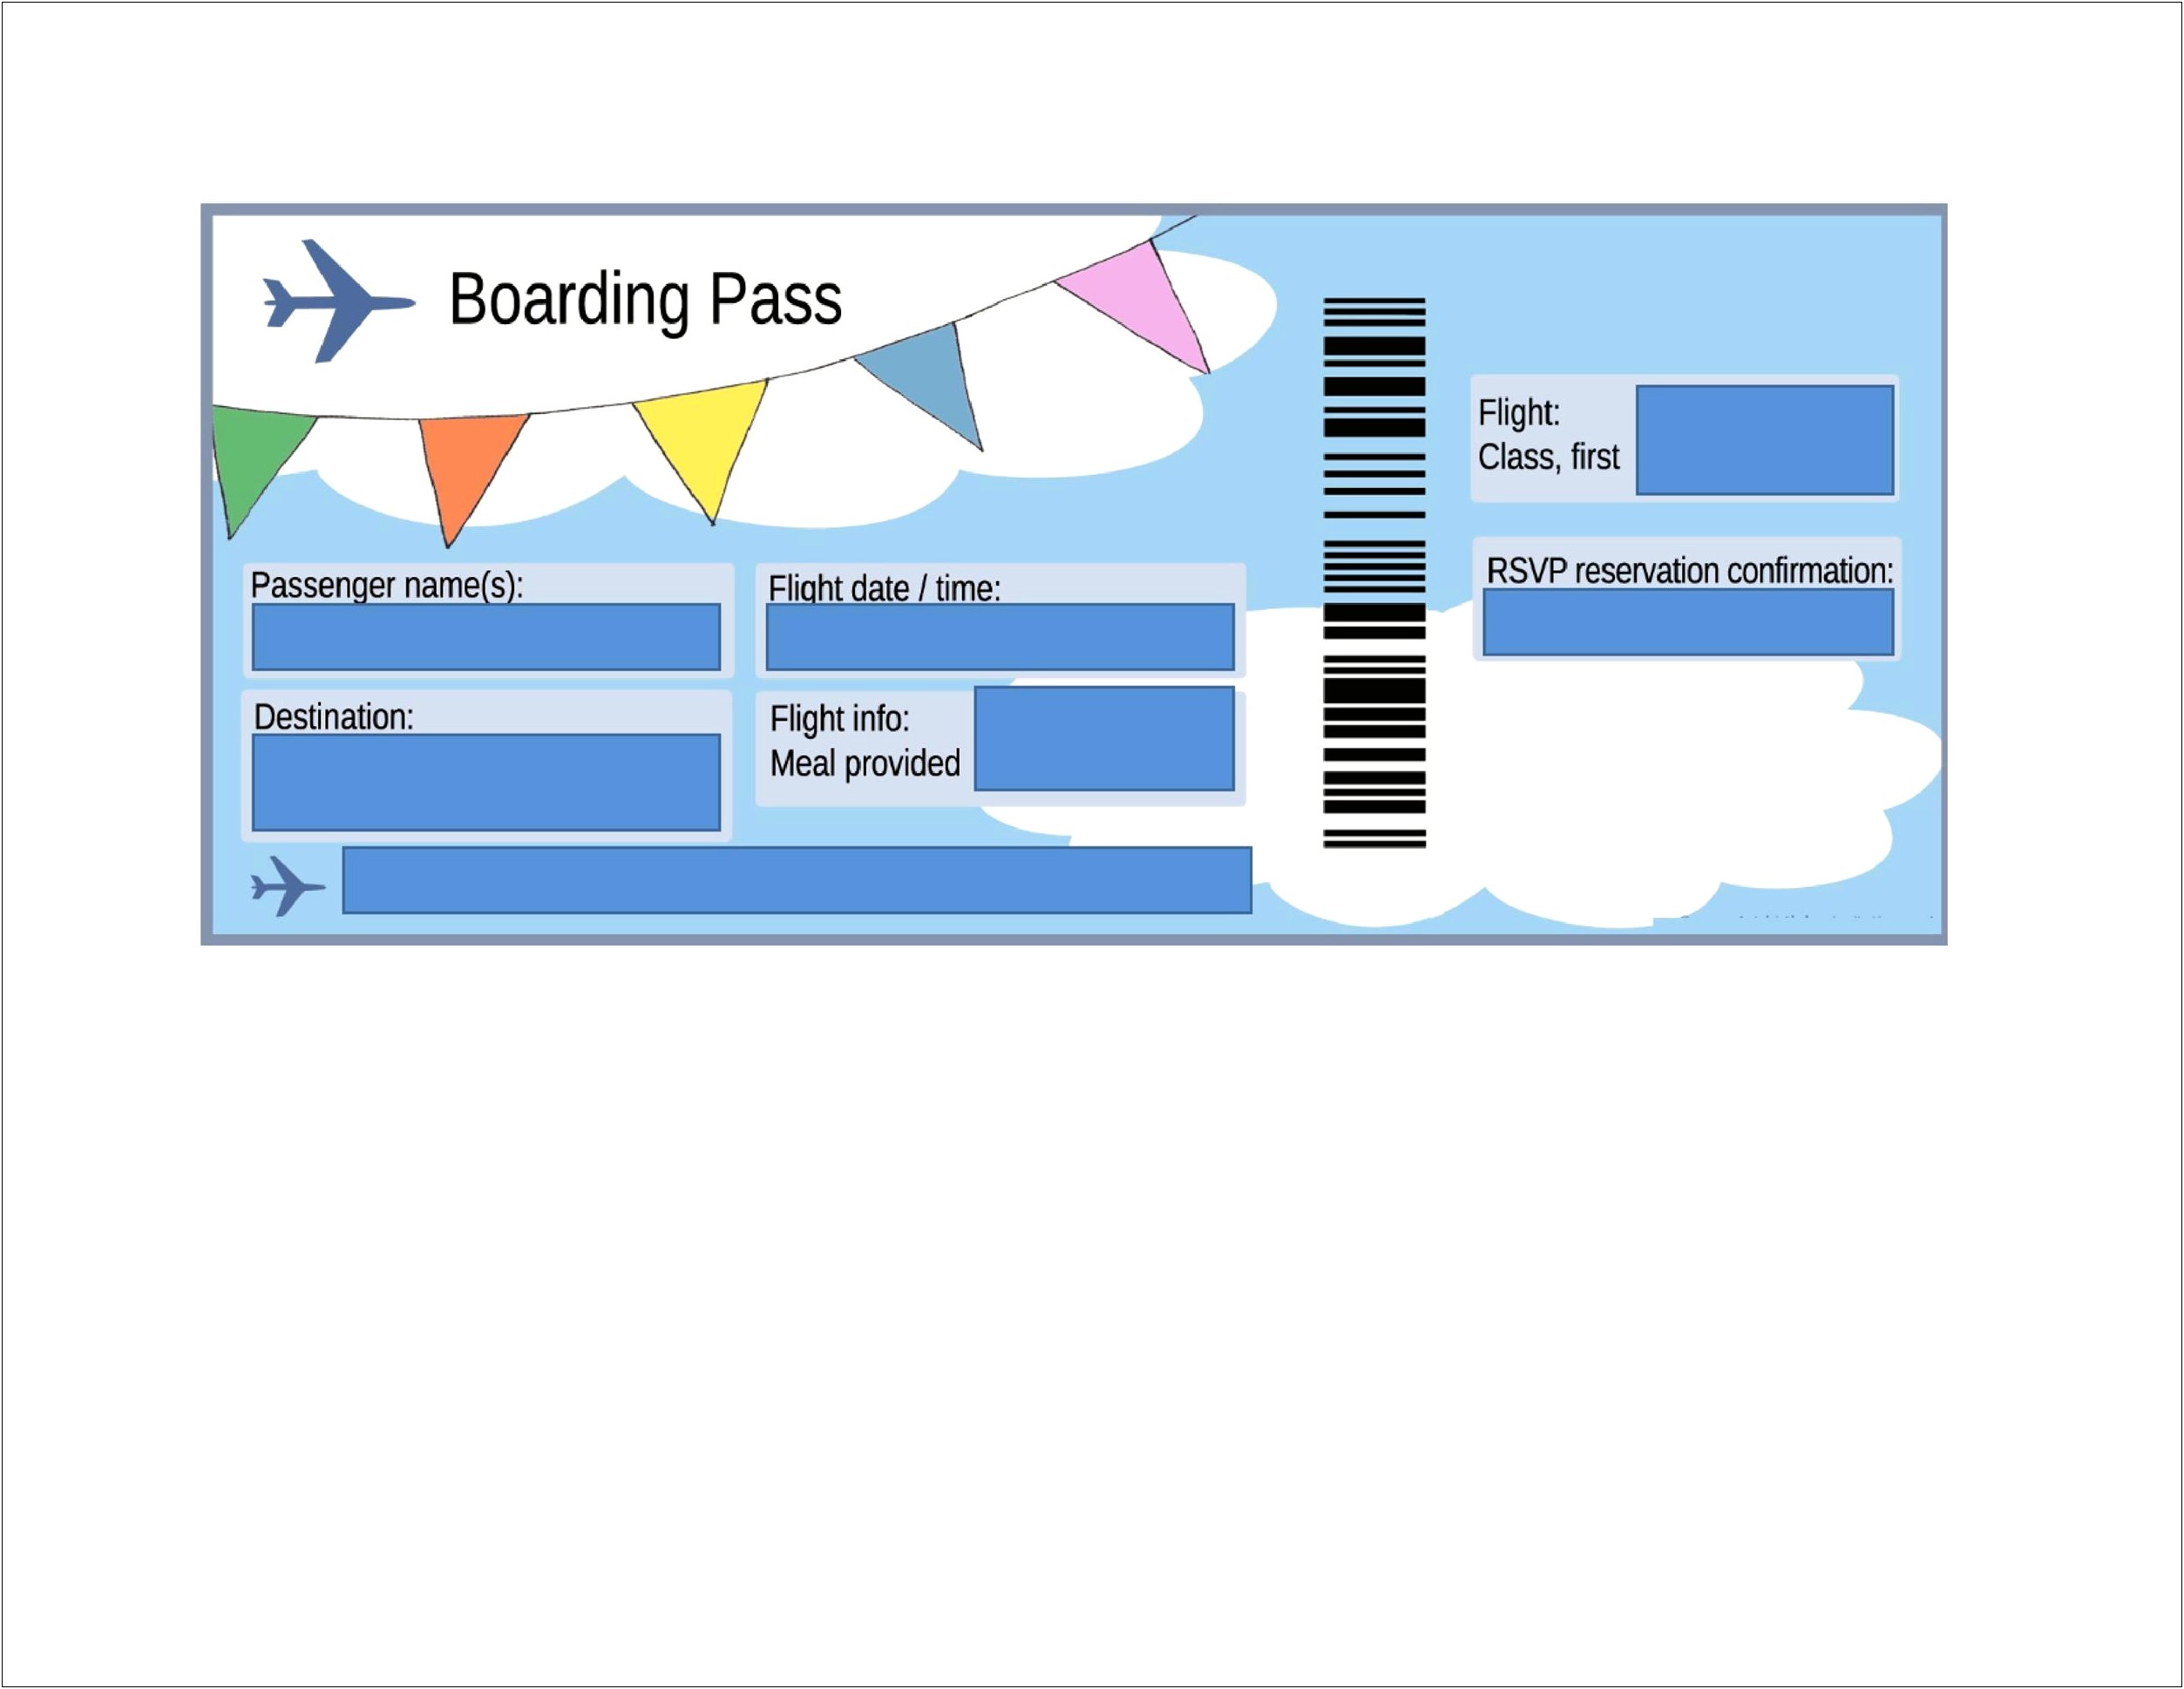 Free Printable Vacation Boarding Pass Invitation Template